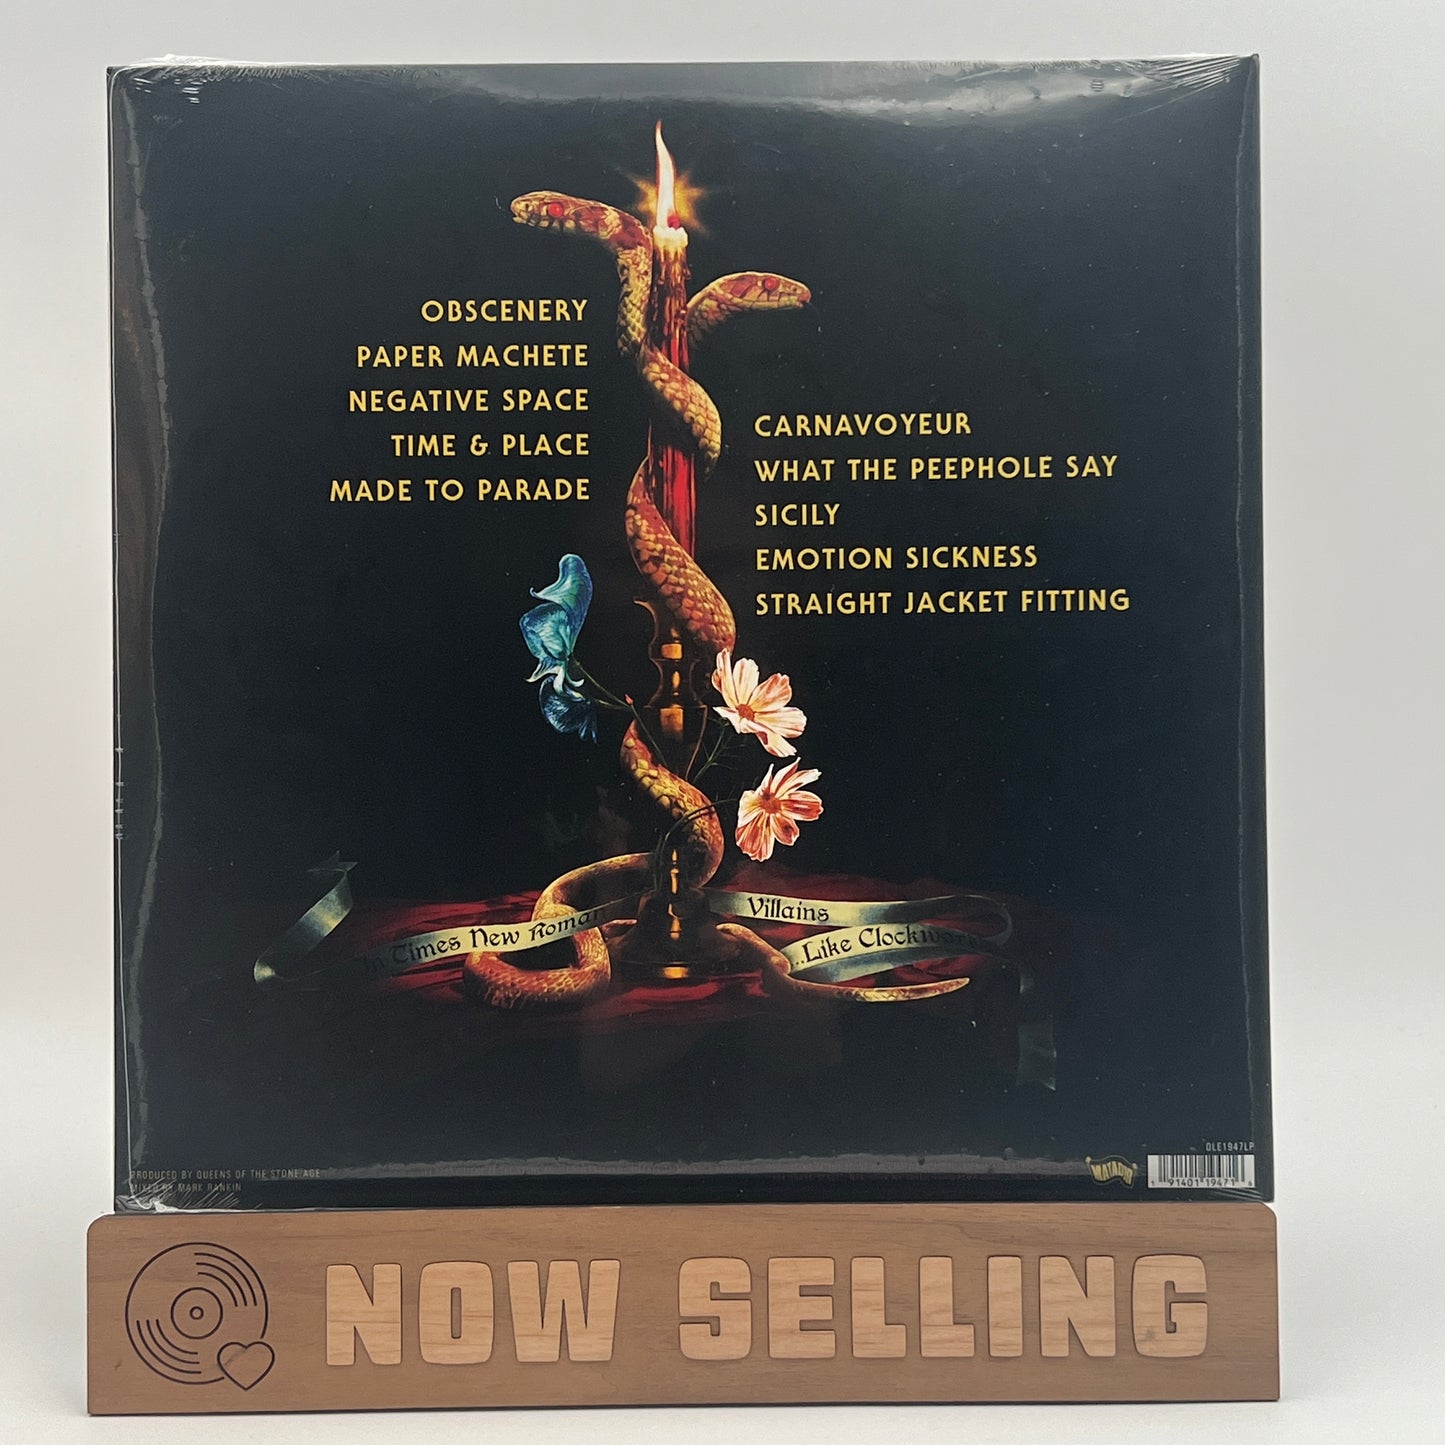 Queens of the Stone Age - In Times New Roman... Vinyl LP Black